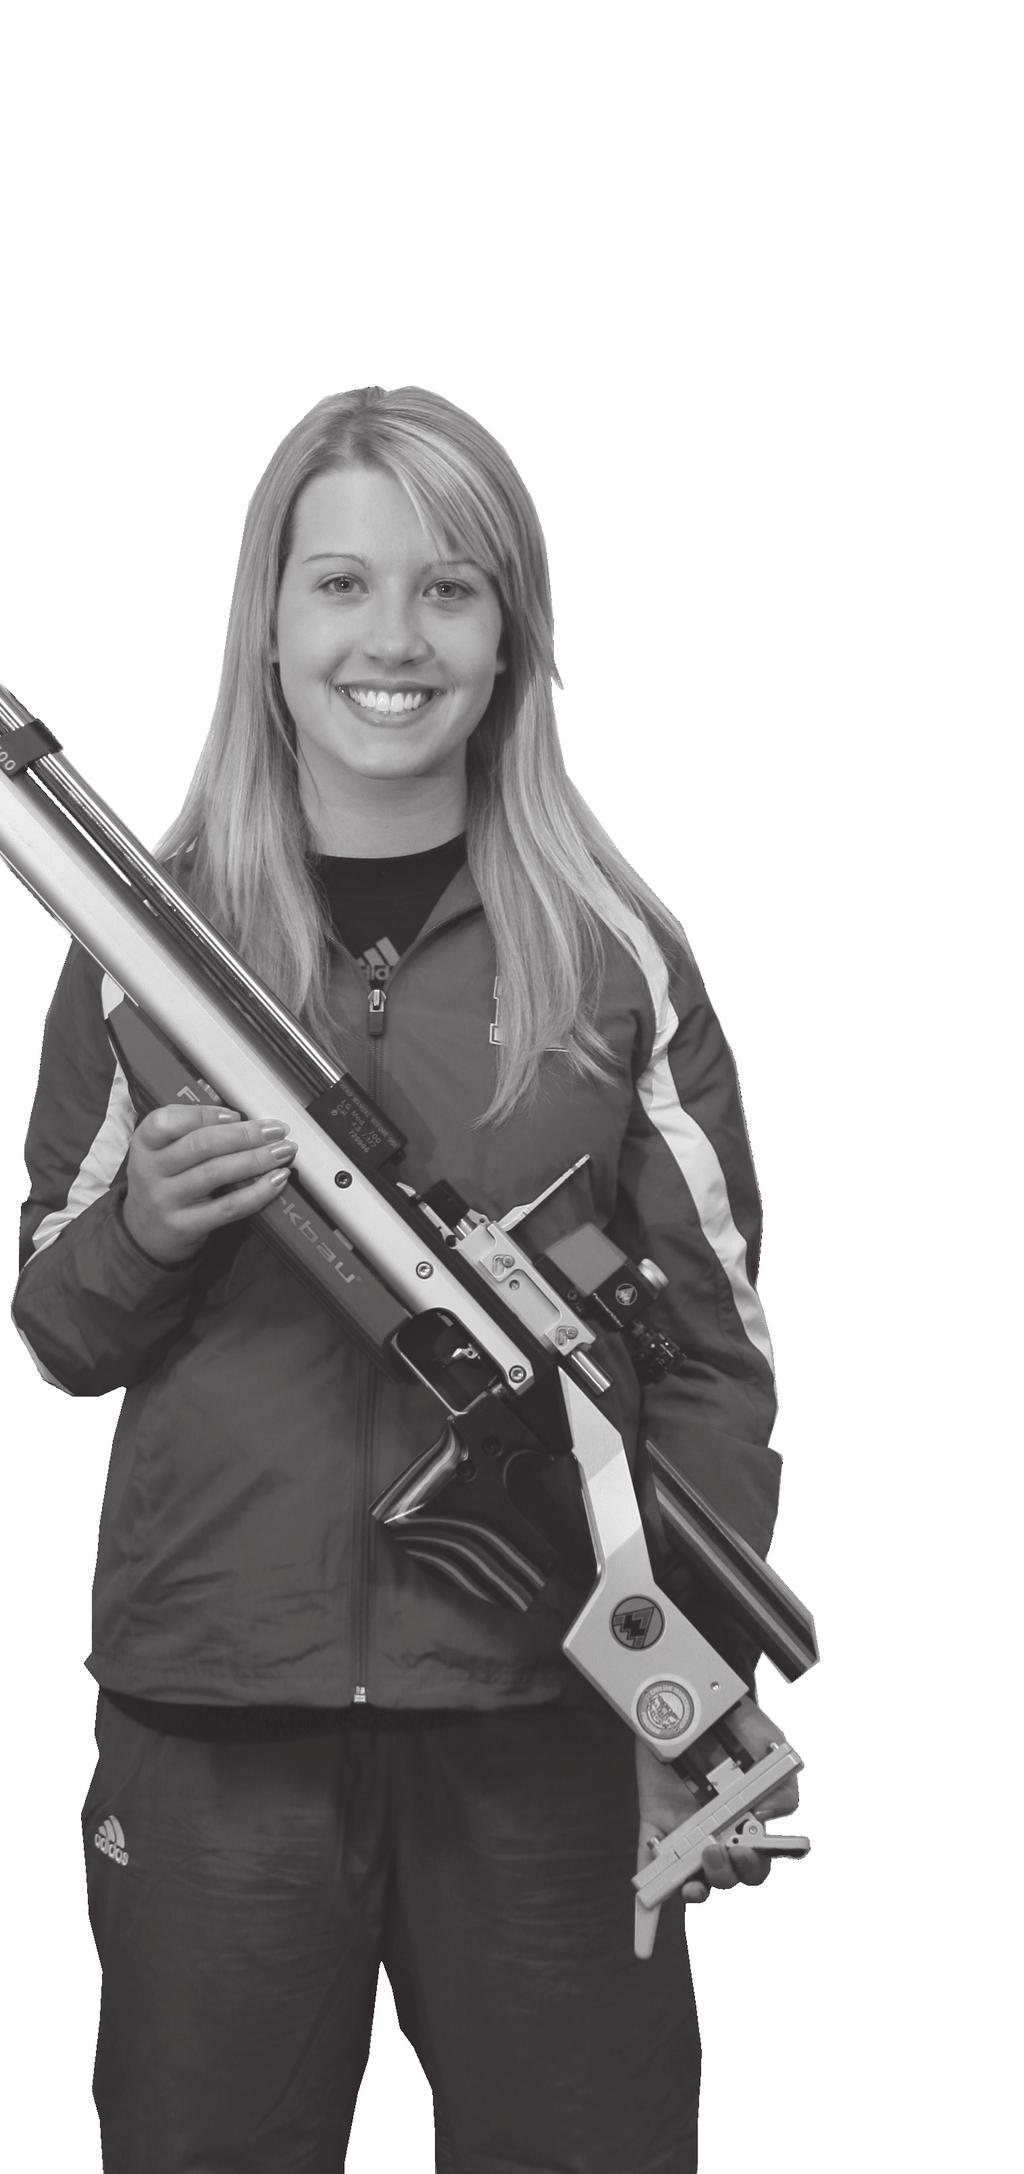 She s really looking forward to trying to boost her smallbore score, but she knows what her strength is, and that s air rifle, and she s worked really hard on that this summer, Head Coach